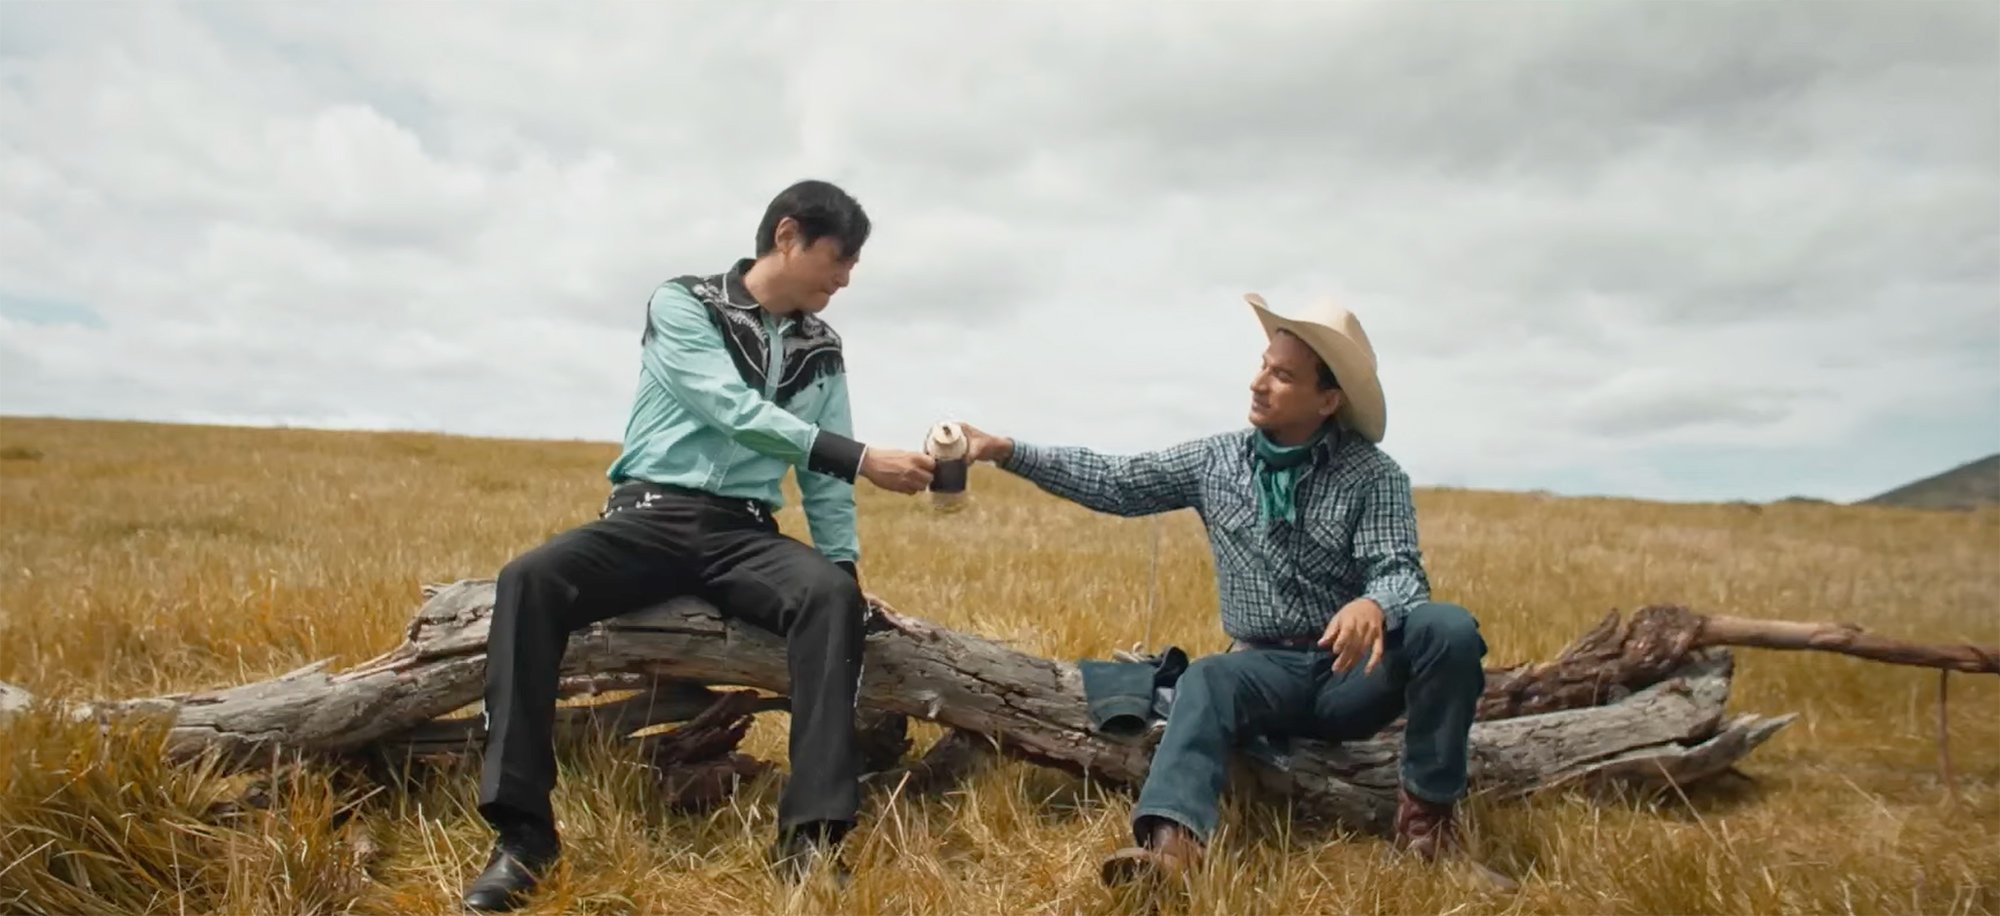 Official Trailer for 'Tokyo Cowboy' About a Japanese Man in Montana